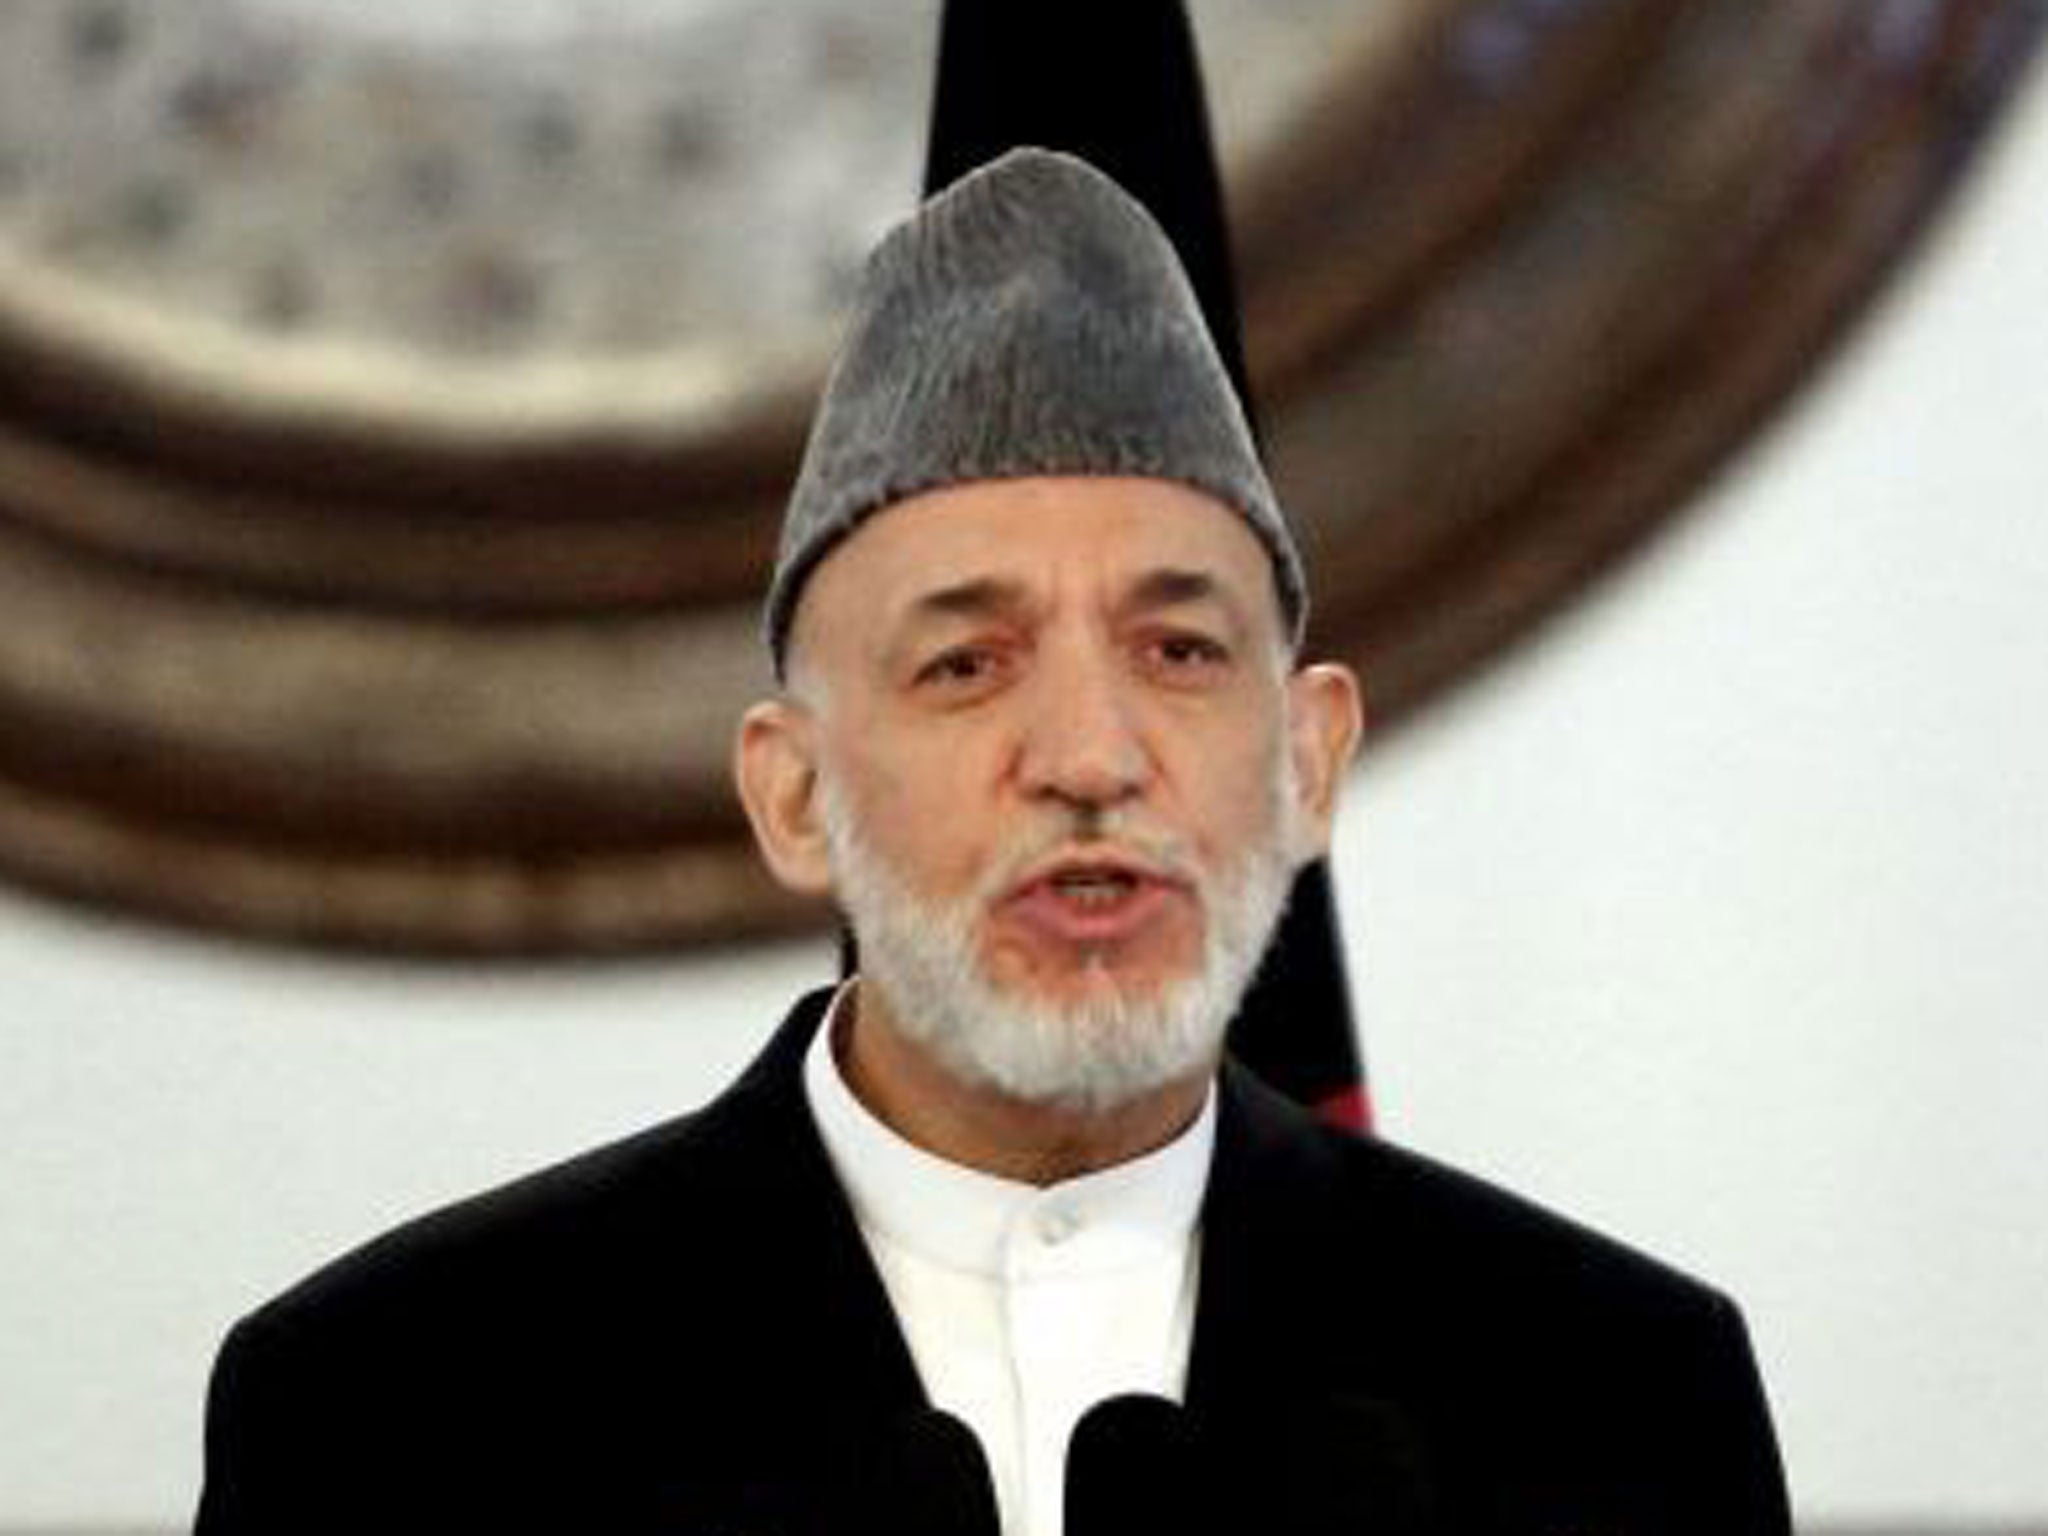 Hamid Karzai refused to sign an agreement with the US to allow 10,000 military advisers to stay